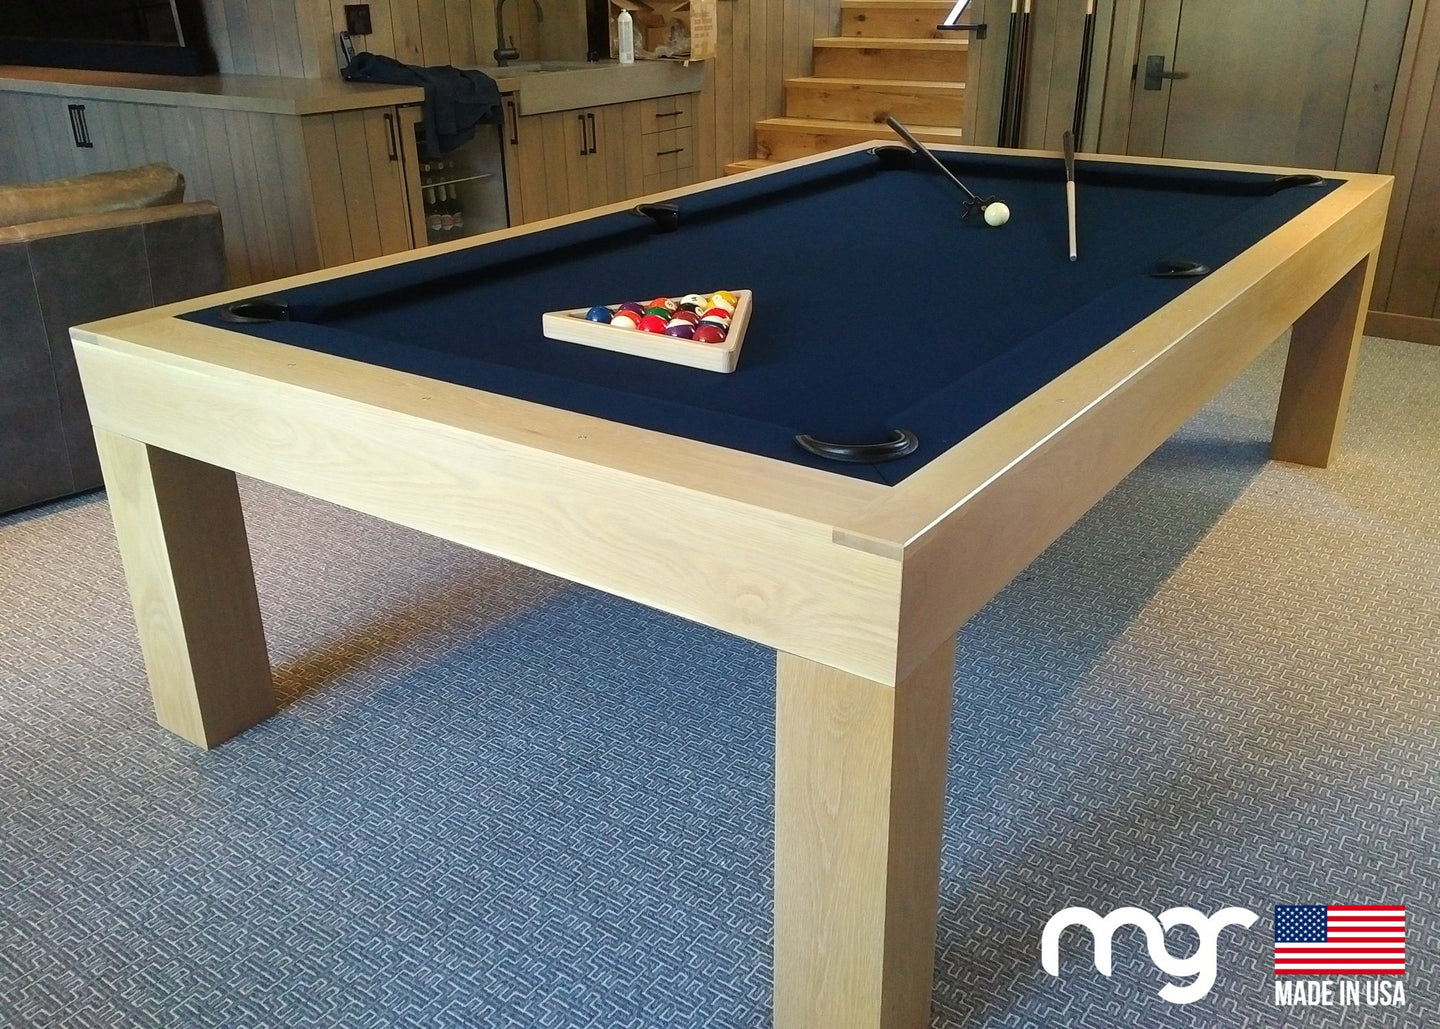 The Modern X87 Pool Table